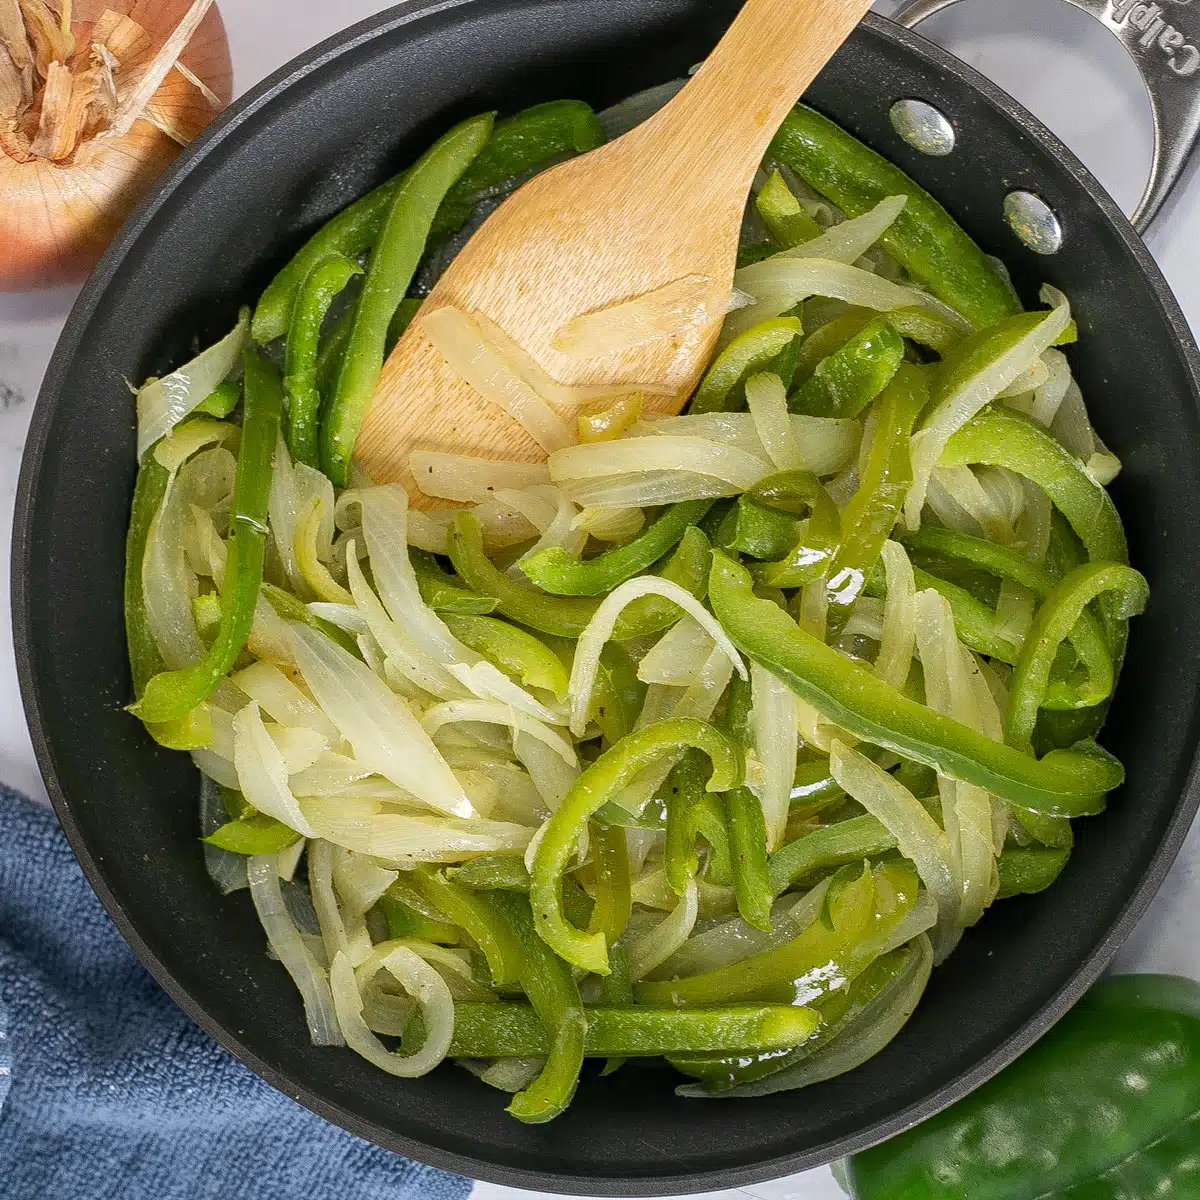 Square image of sauteed peppers and onions in a skillet with a wooden spoon.